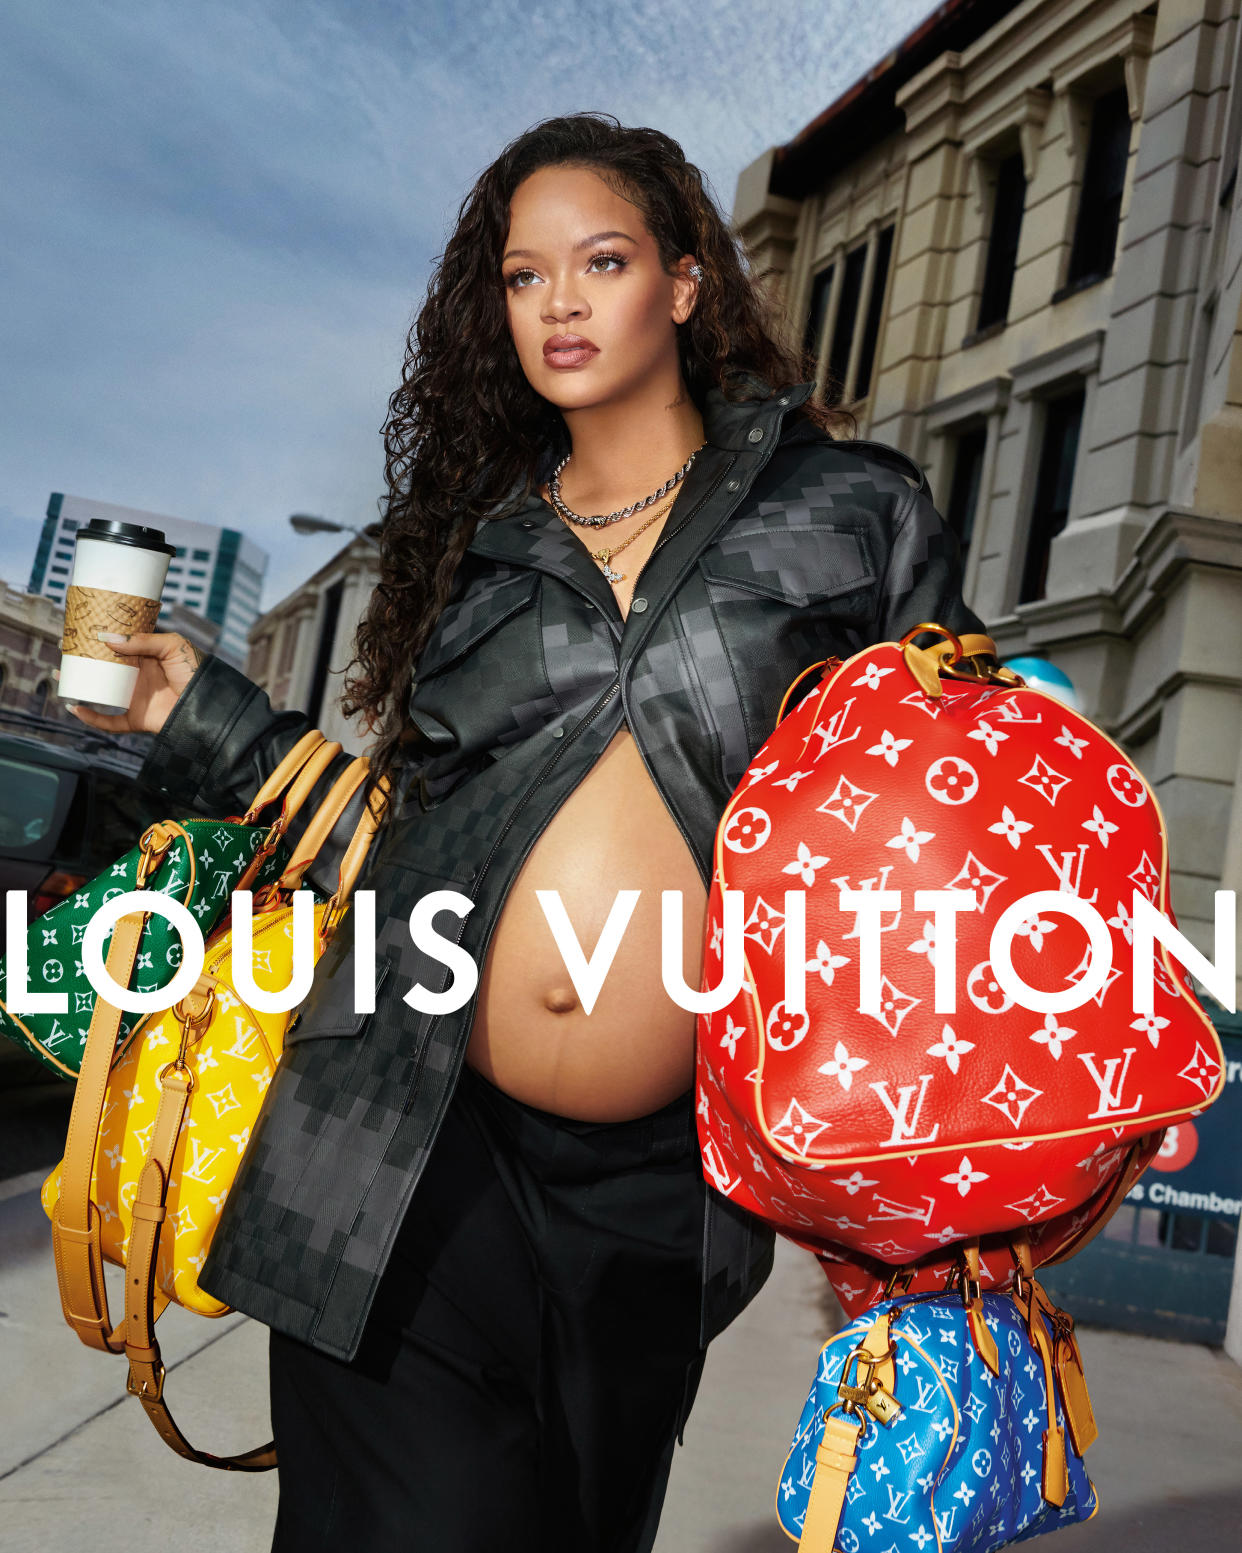 Rihanna holds a coffee and three Louis Vuitton bags as she walks on a city street with her baby bump displayed. (Courtesy Louis Vuitton)